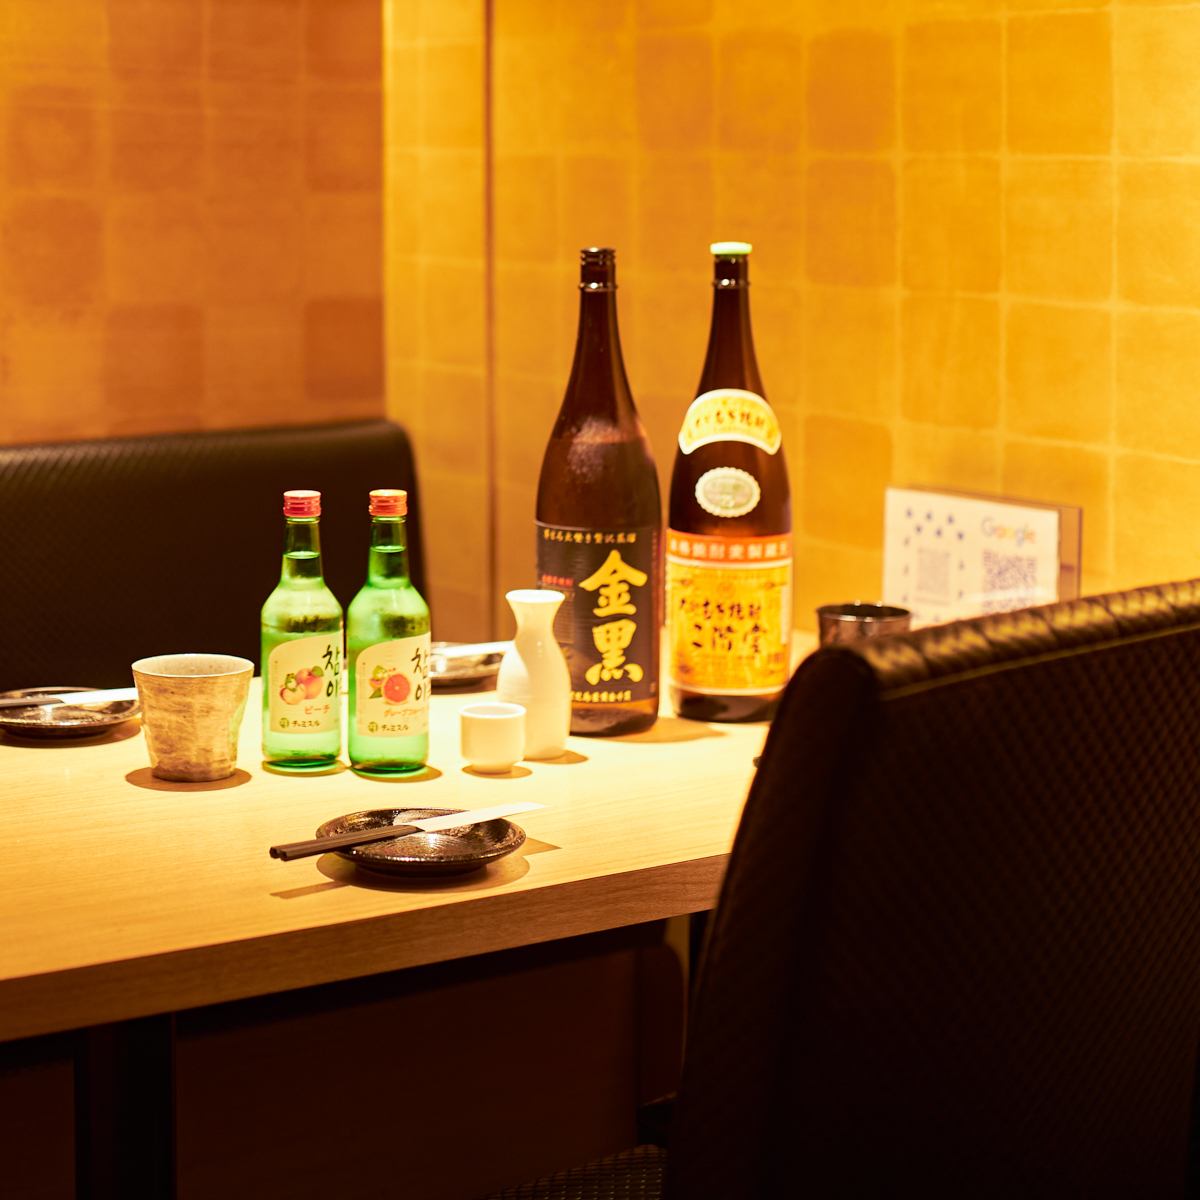 1 minute walk from Susukino Station★Private rooms available (first 5 groups) All-you-can-drink 1500 yen → 888 yen♪